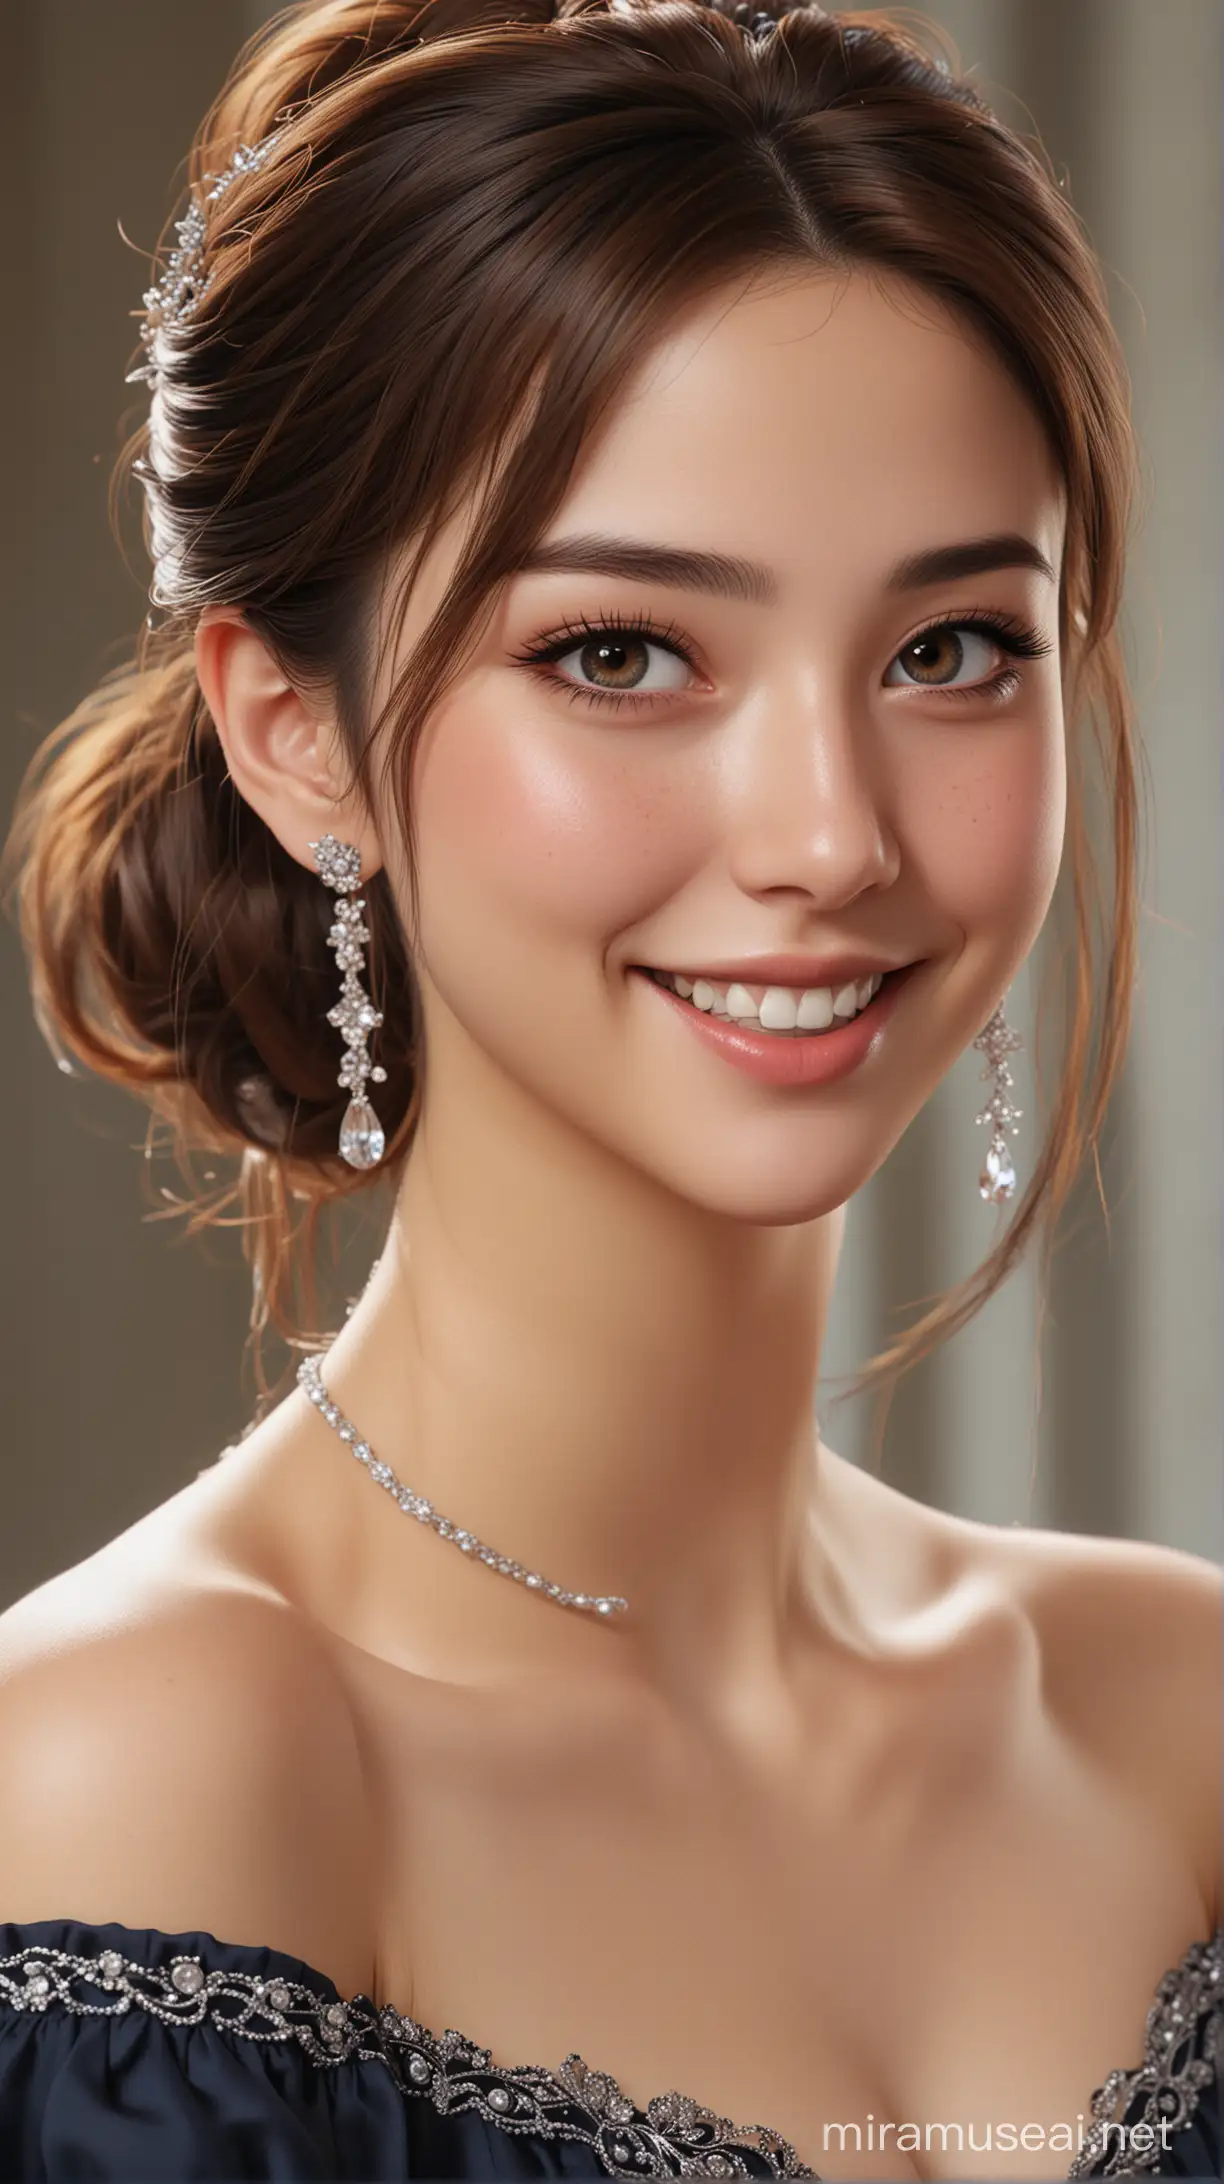 Brunette in Elegant Jewelry Full Body Portrait with Detailed Accessories